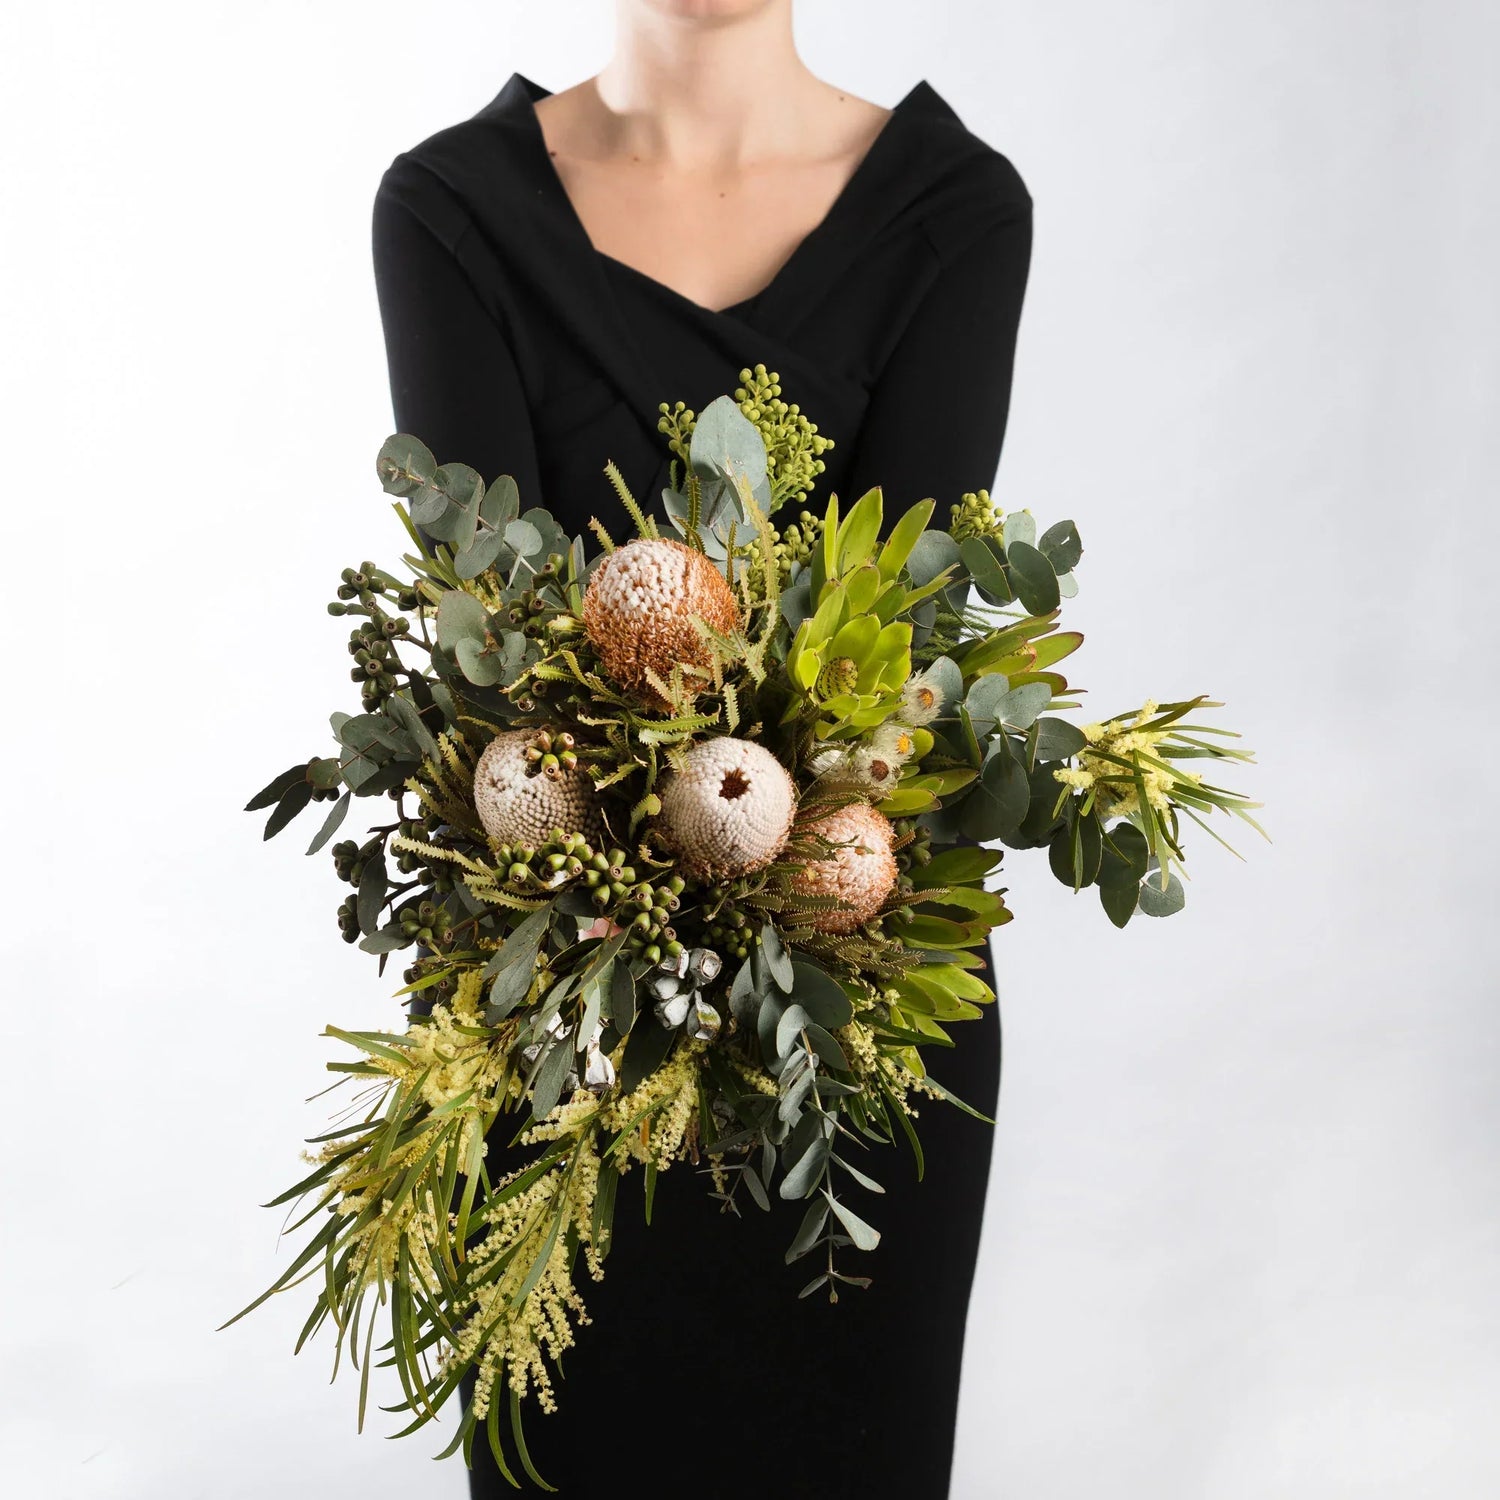 A woman earing black, holding a bouquet of Australian native wildflowers  in a bouquet.